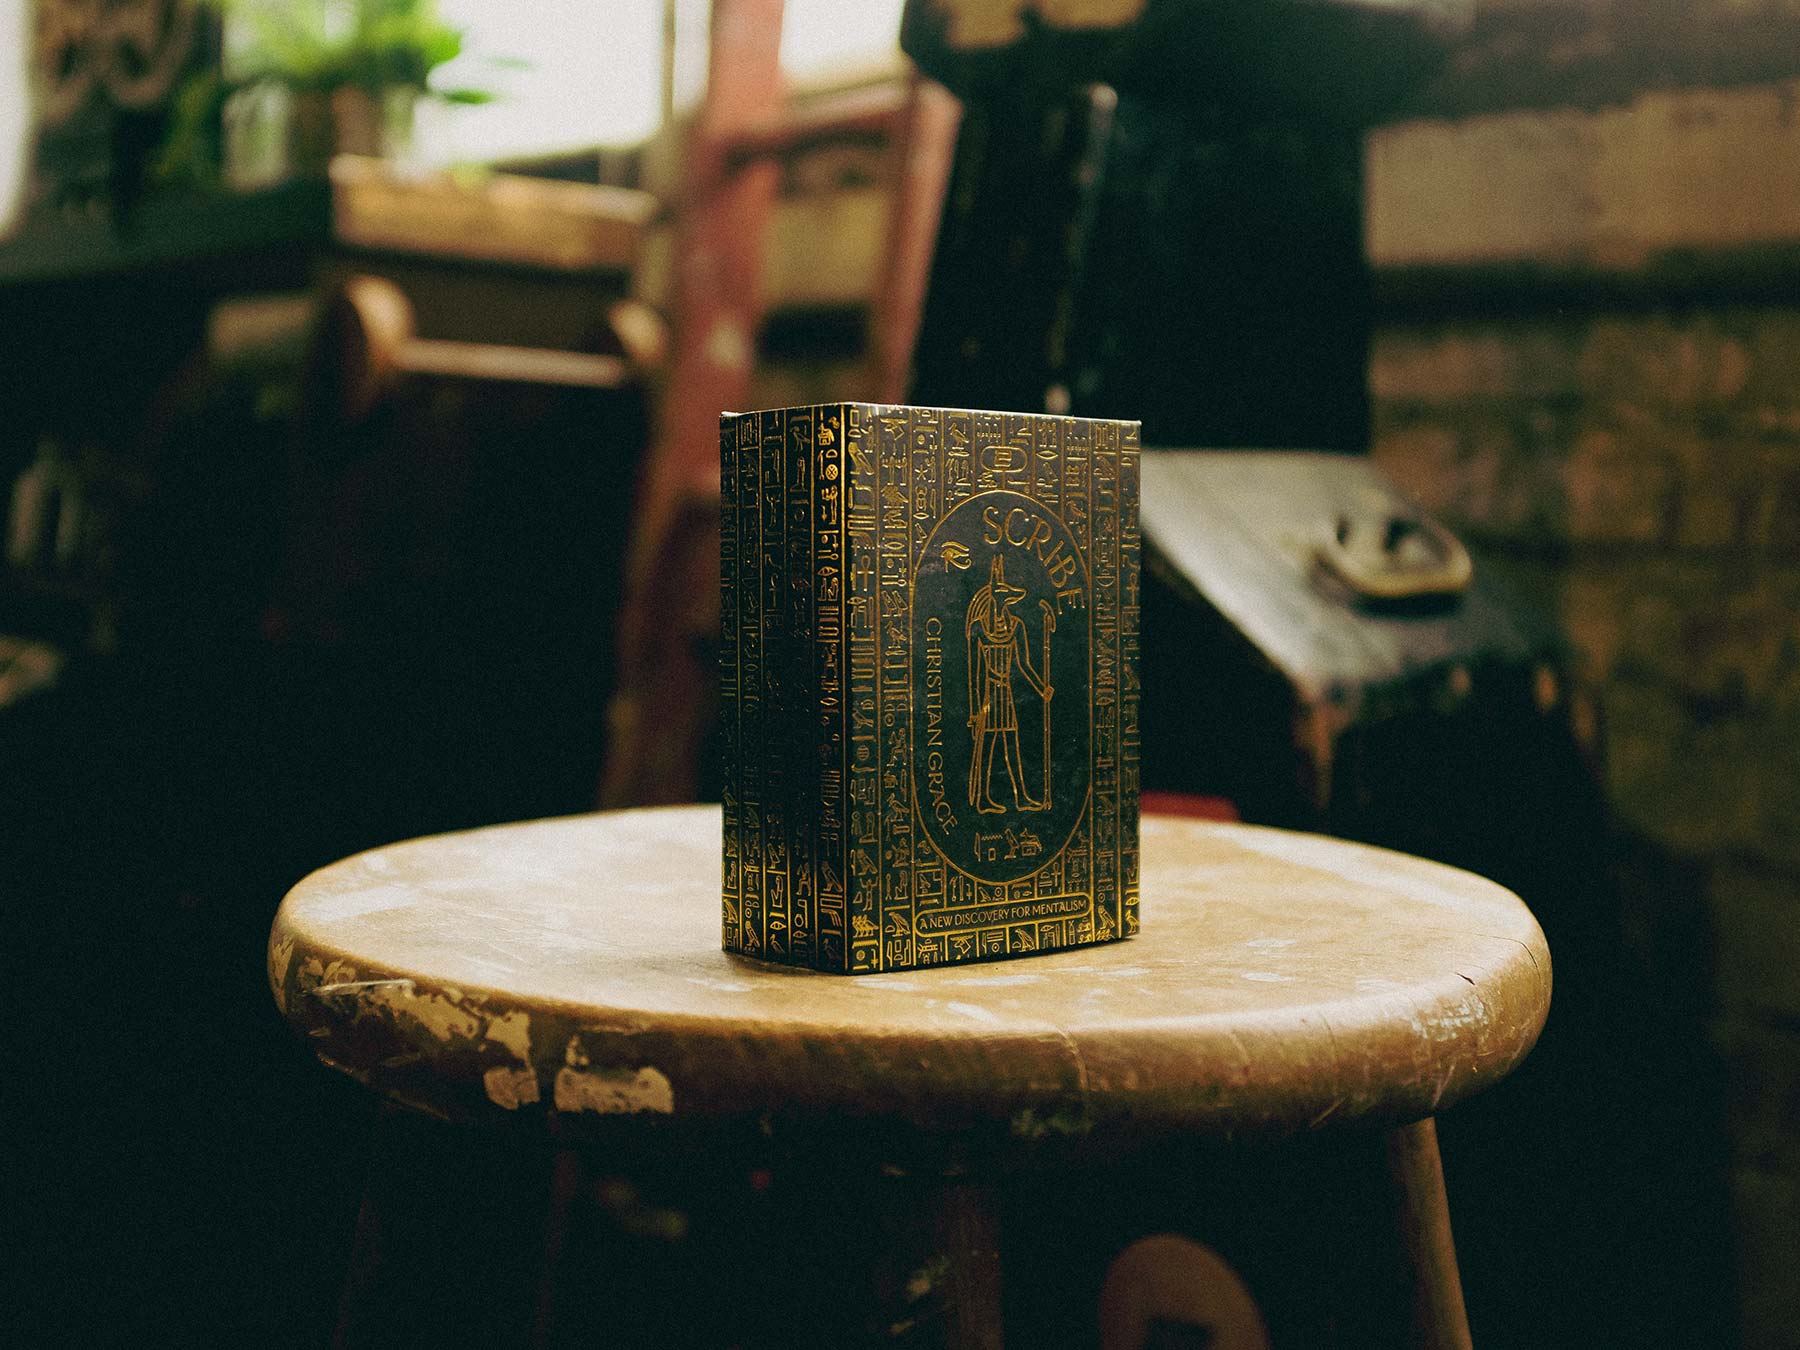 SCRIBE: COMING SOON by Christian Grace | Ellusionist